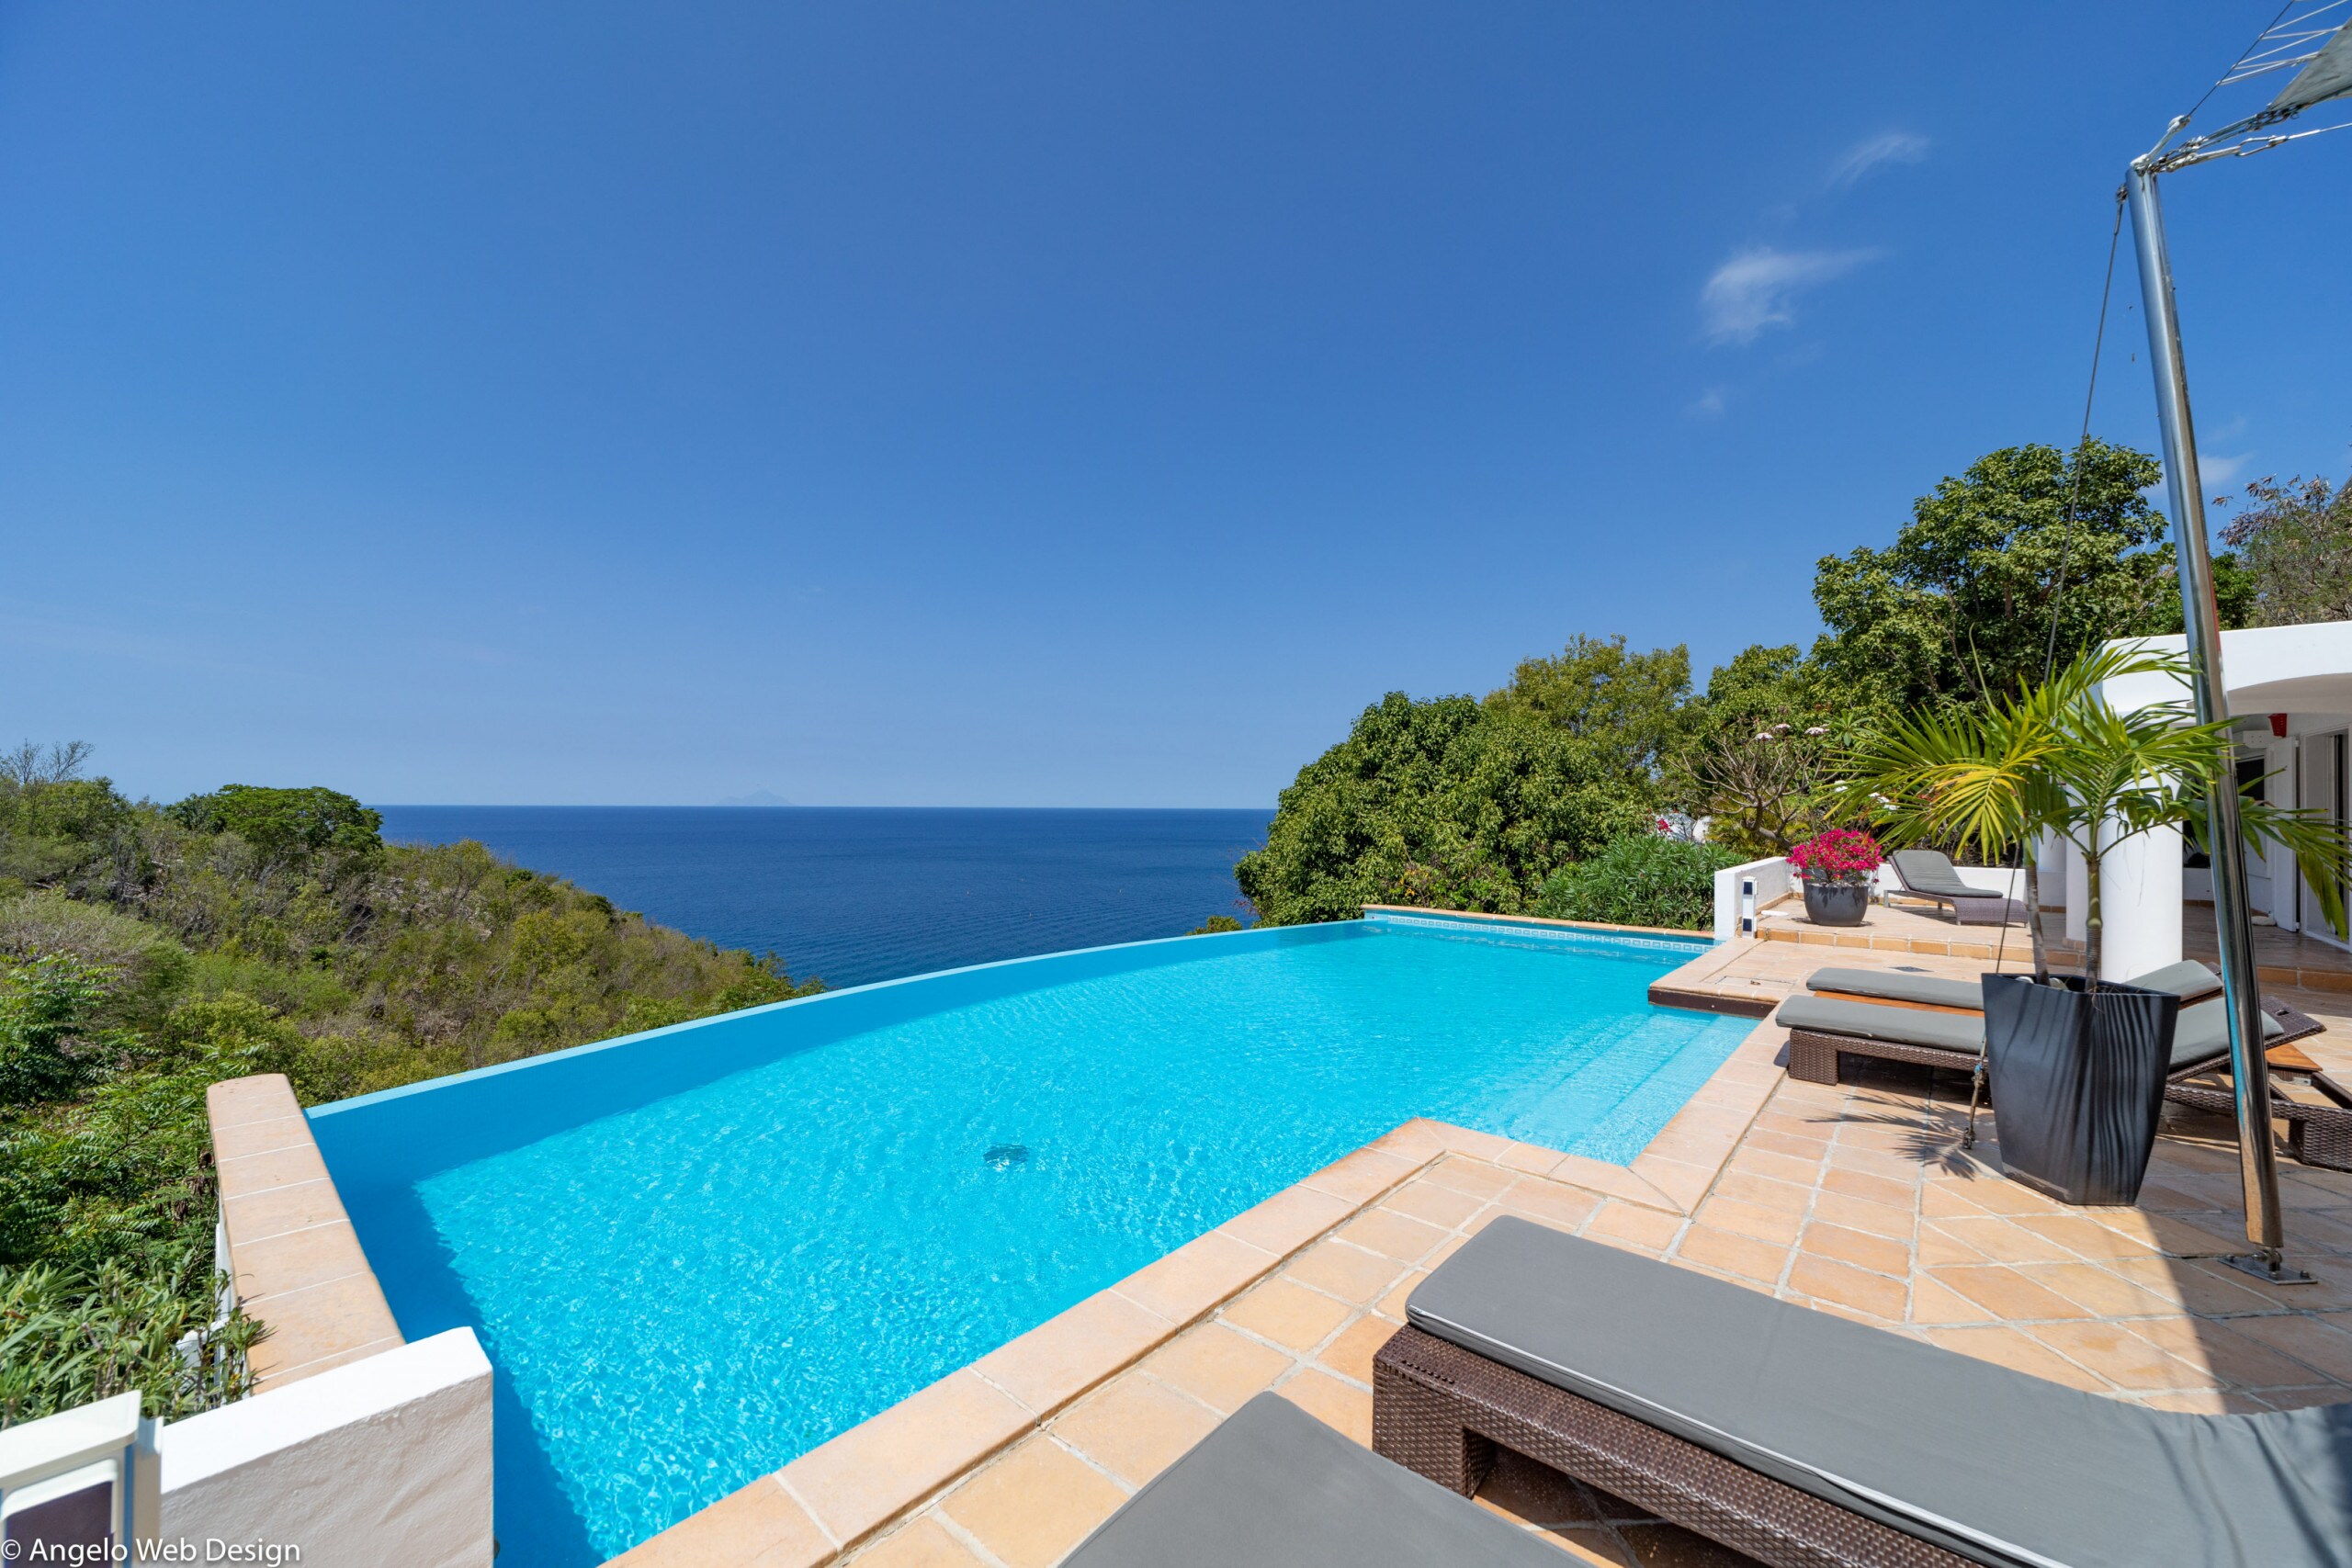 Beautiful pool, expansive terrace with loungers and deck chairs. Gas barbecue.&nbsp;